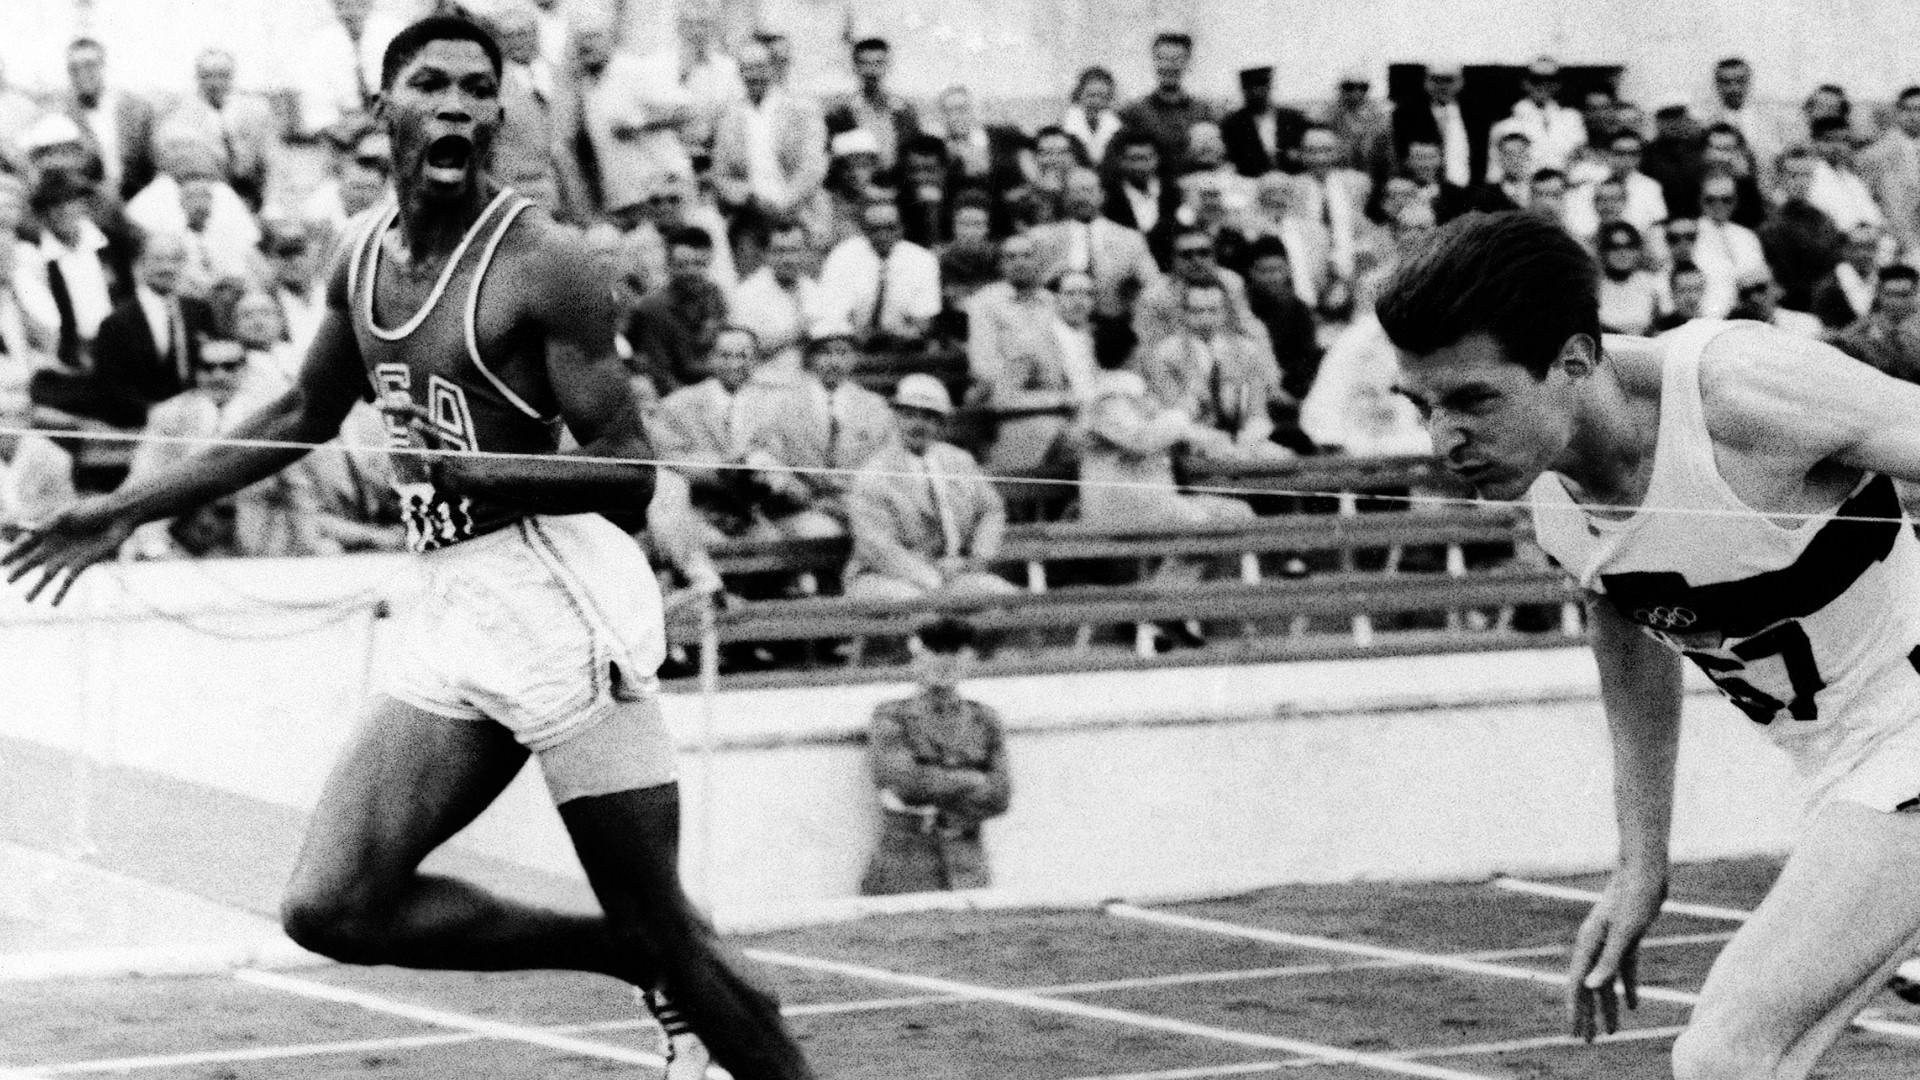 Otis Davis won two gold medals in the 1960 Olympics in Rome. His journey to get there is about sacrifice and perseverance.